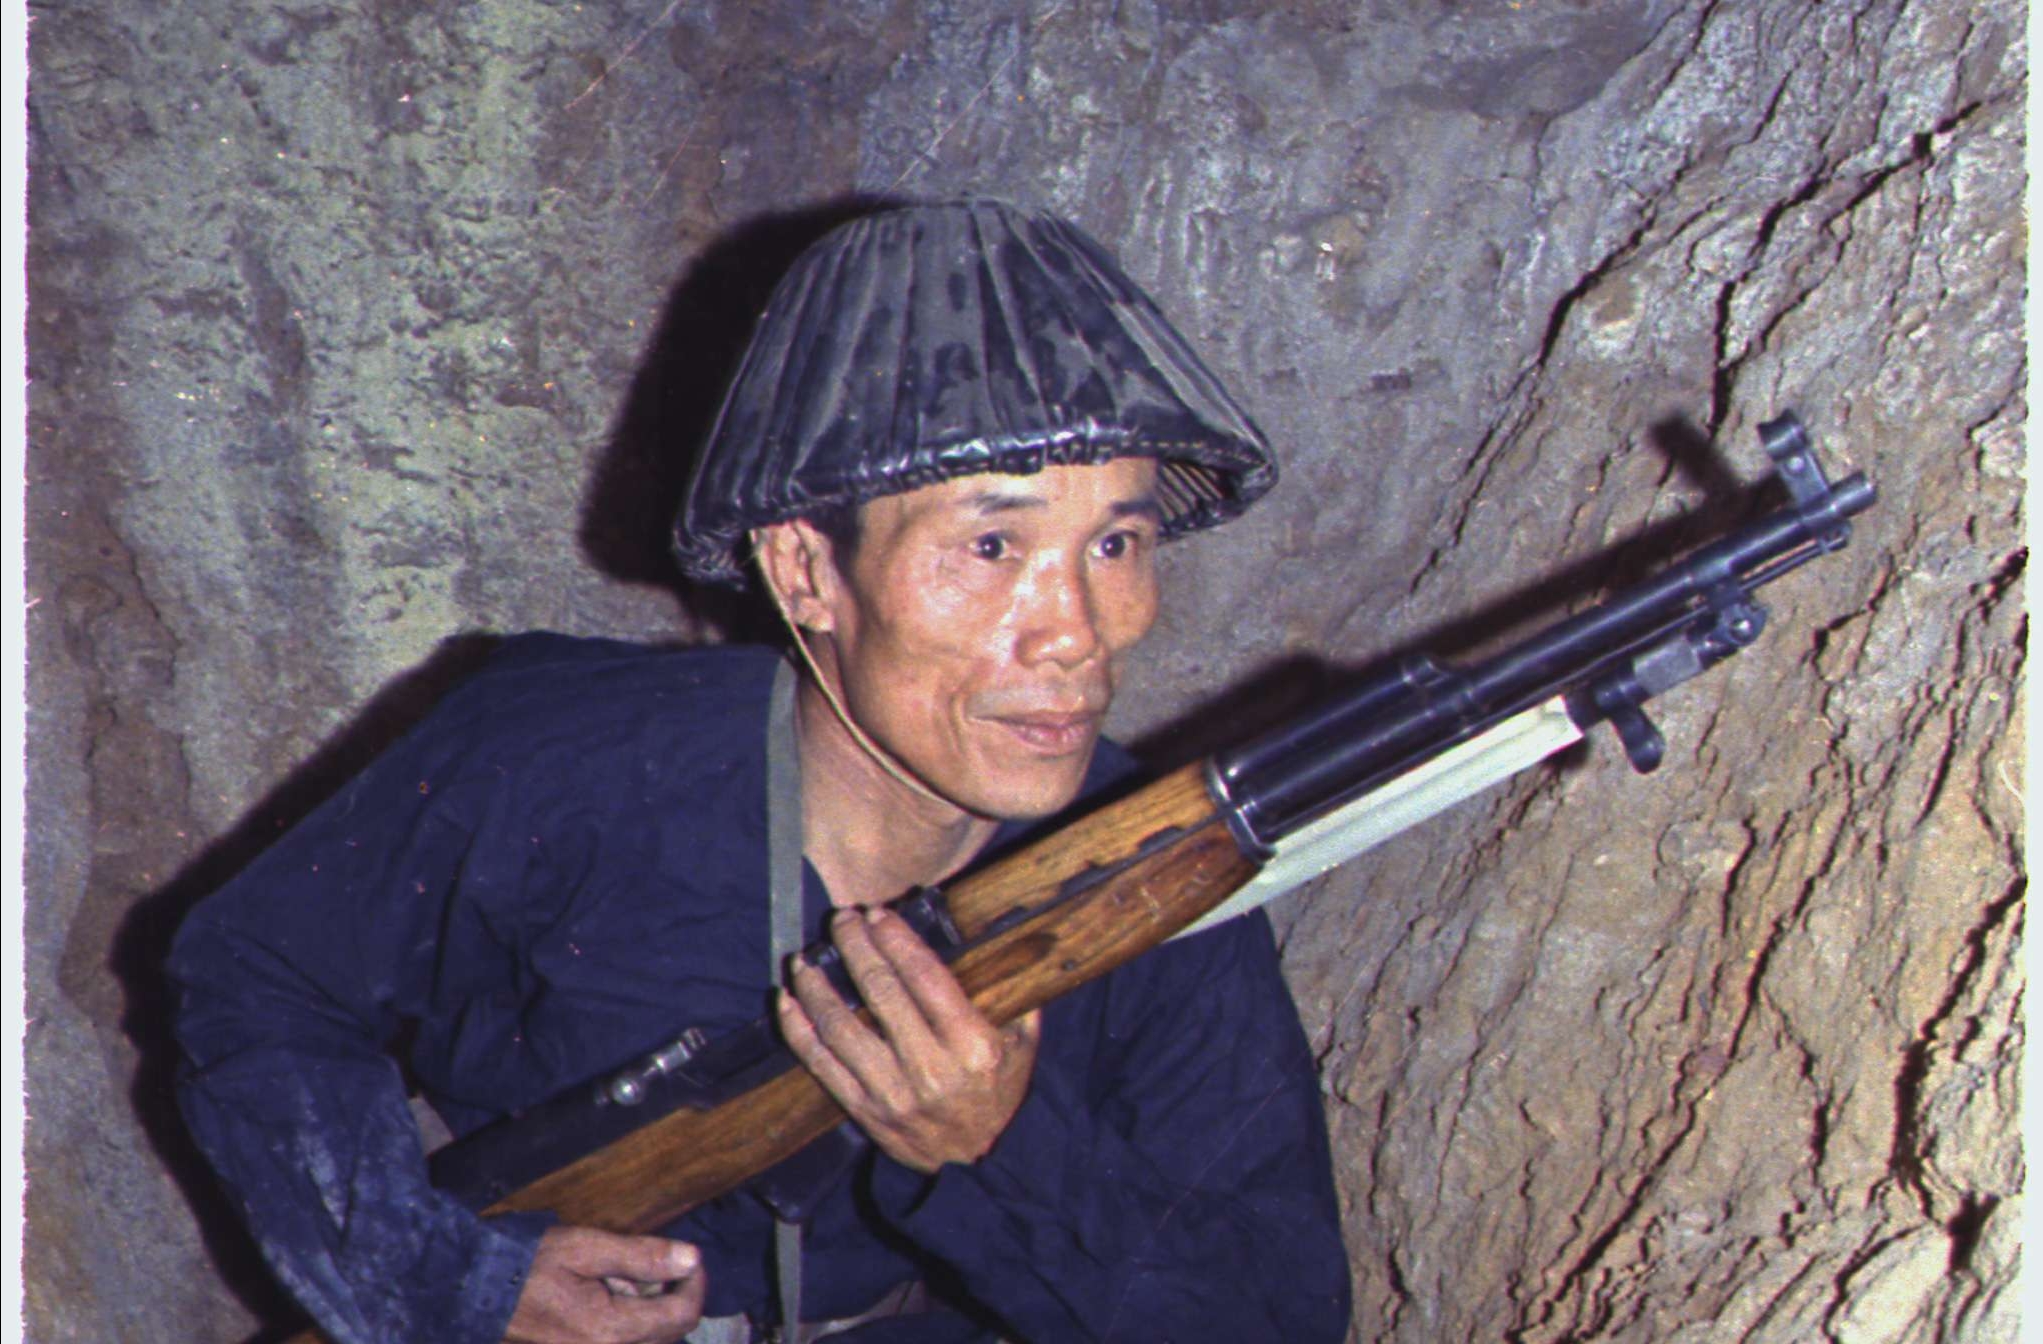 A Viet Cong Soldier Crouches in a Bunker with an SKS Rifle